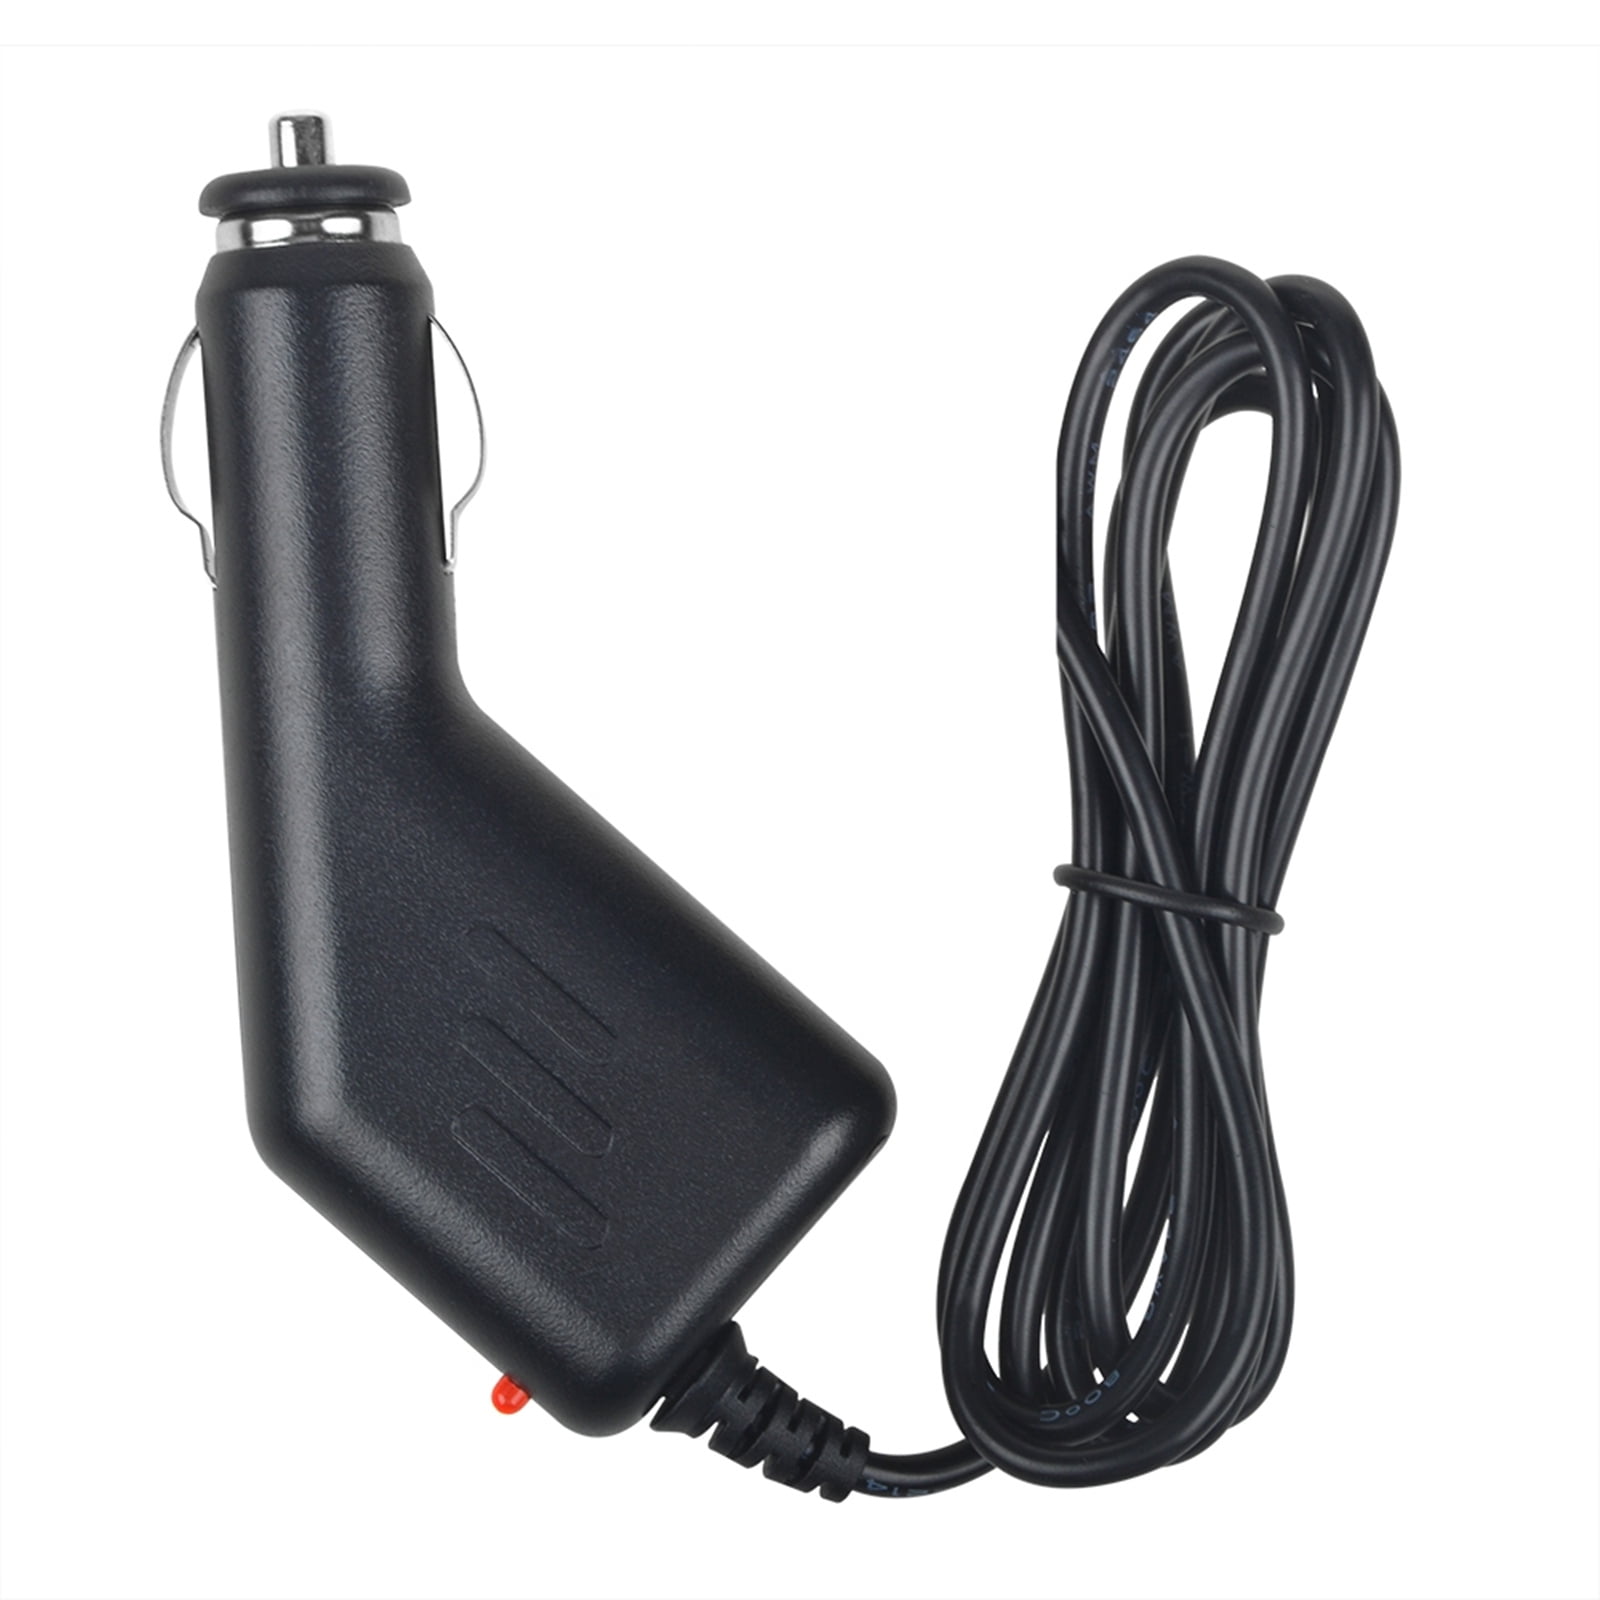 CAR CHARGER POWER ADAPTER Cord for GARMIN NUVI 2457LMT 2458LMT 2555LMT 2577LMT 